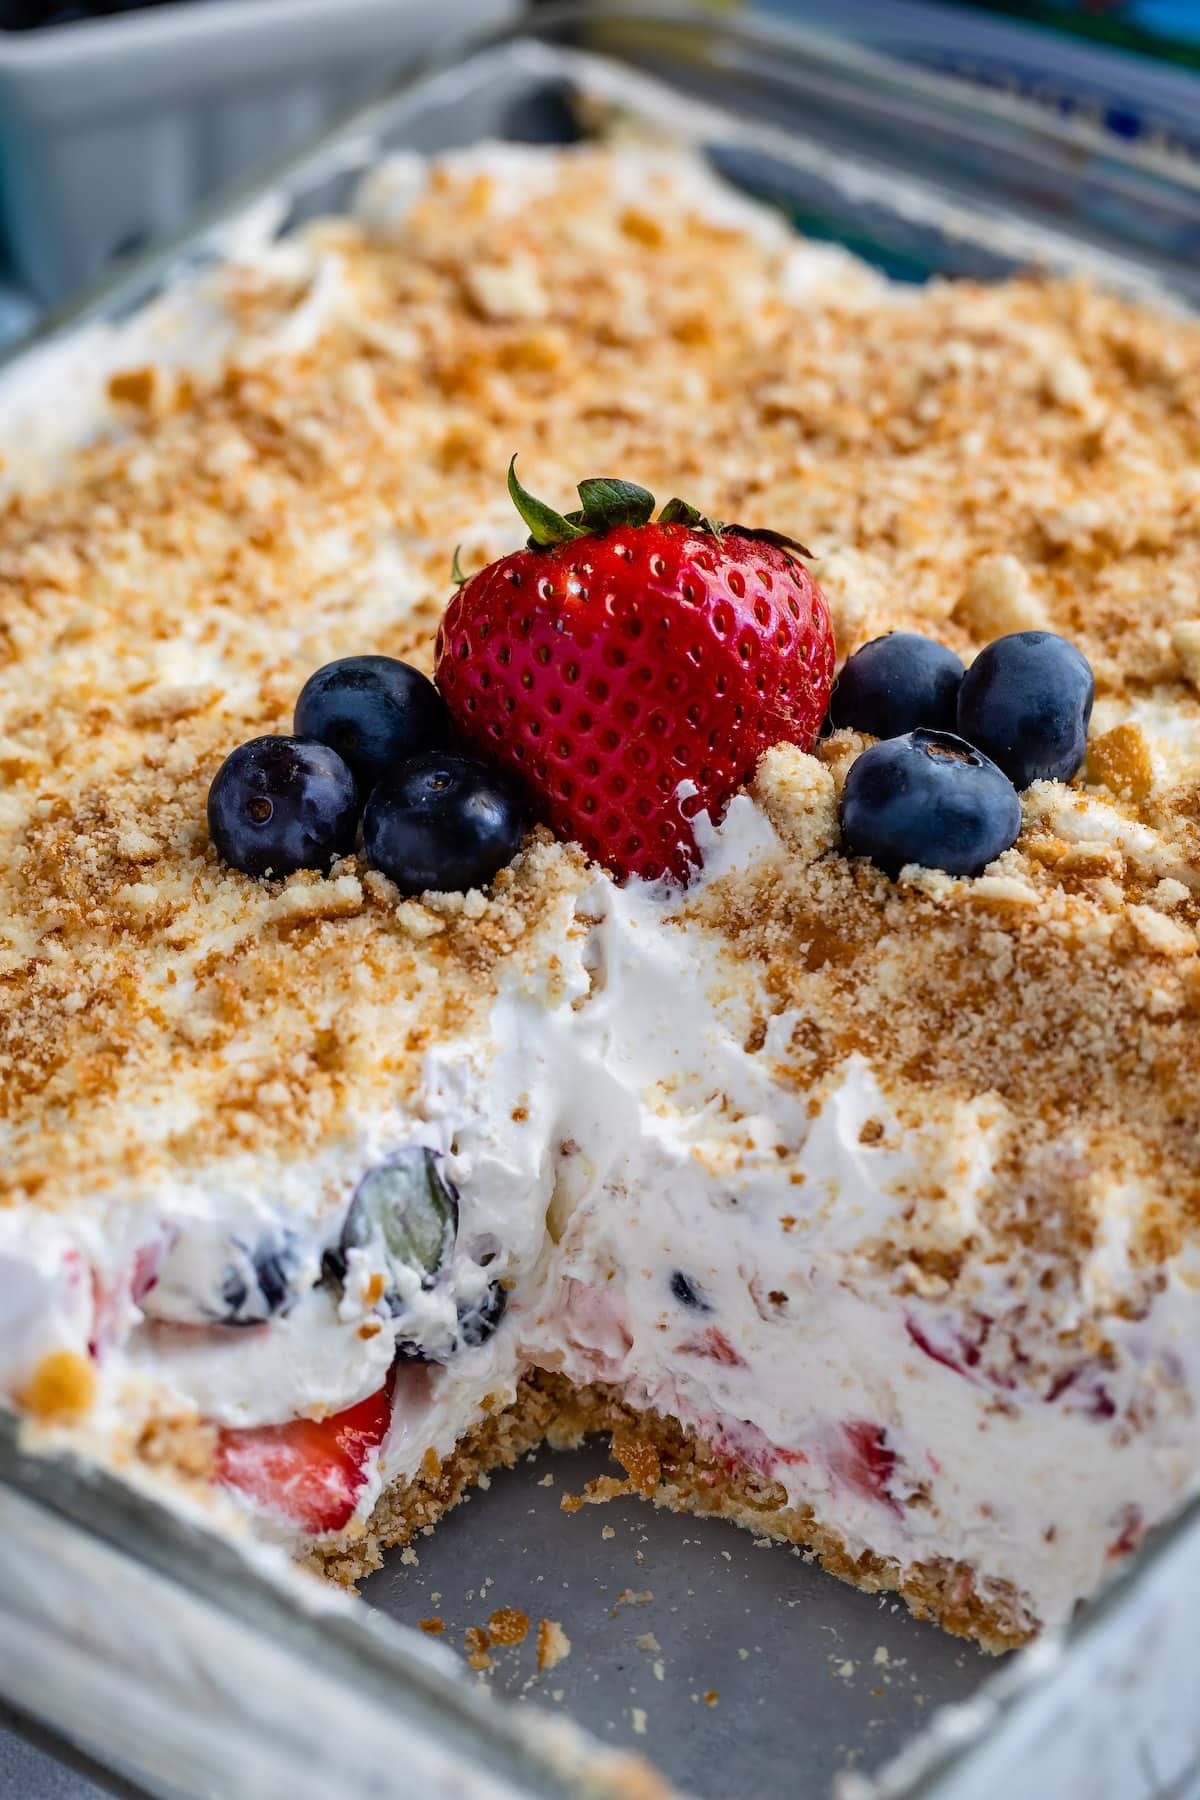 berry lush dessert topped with blueberries and bread crumbs.